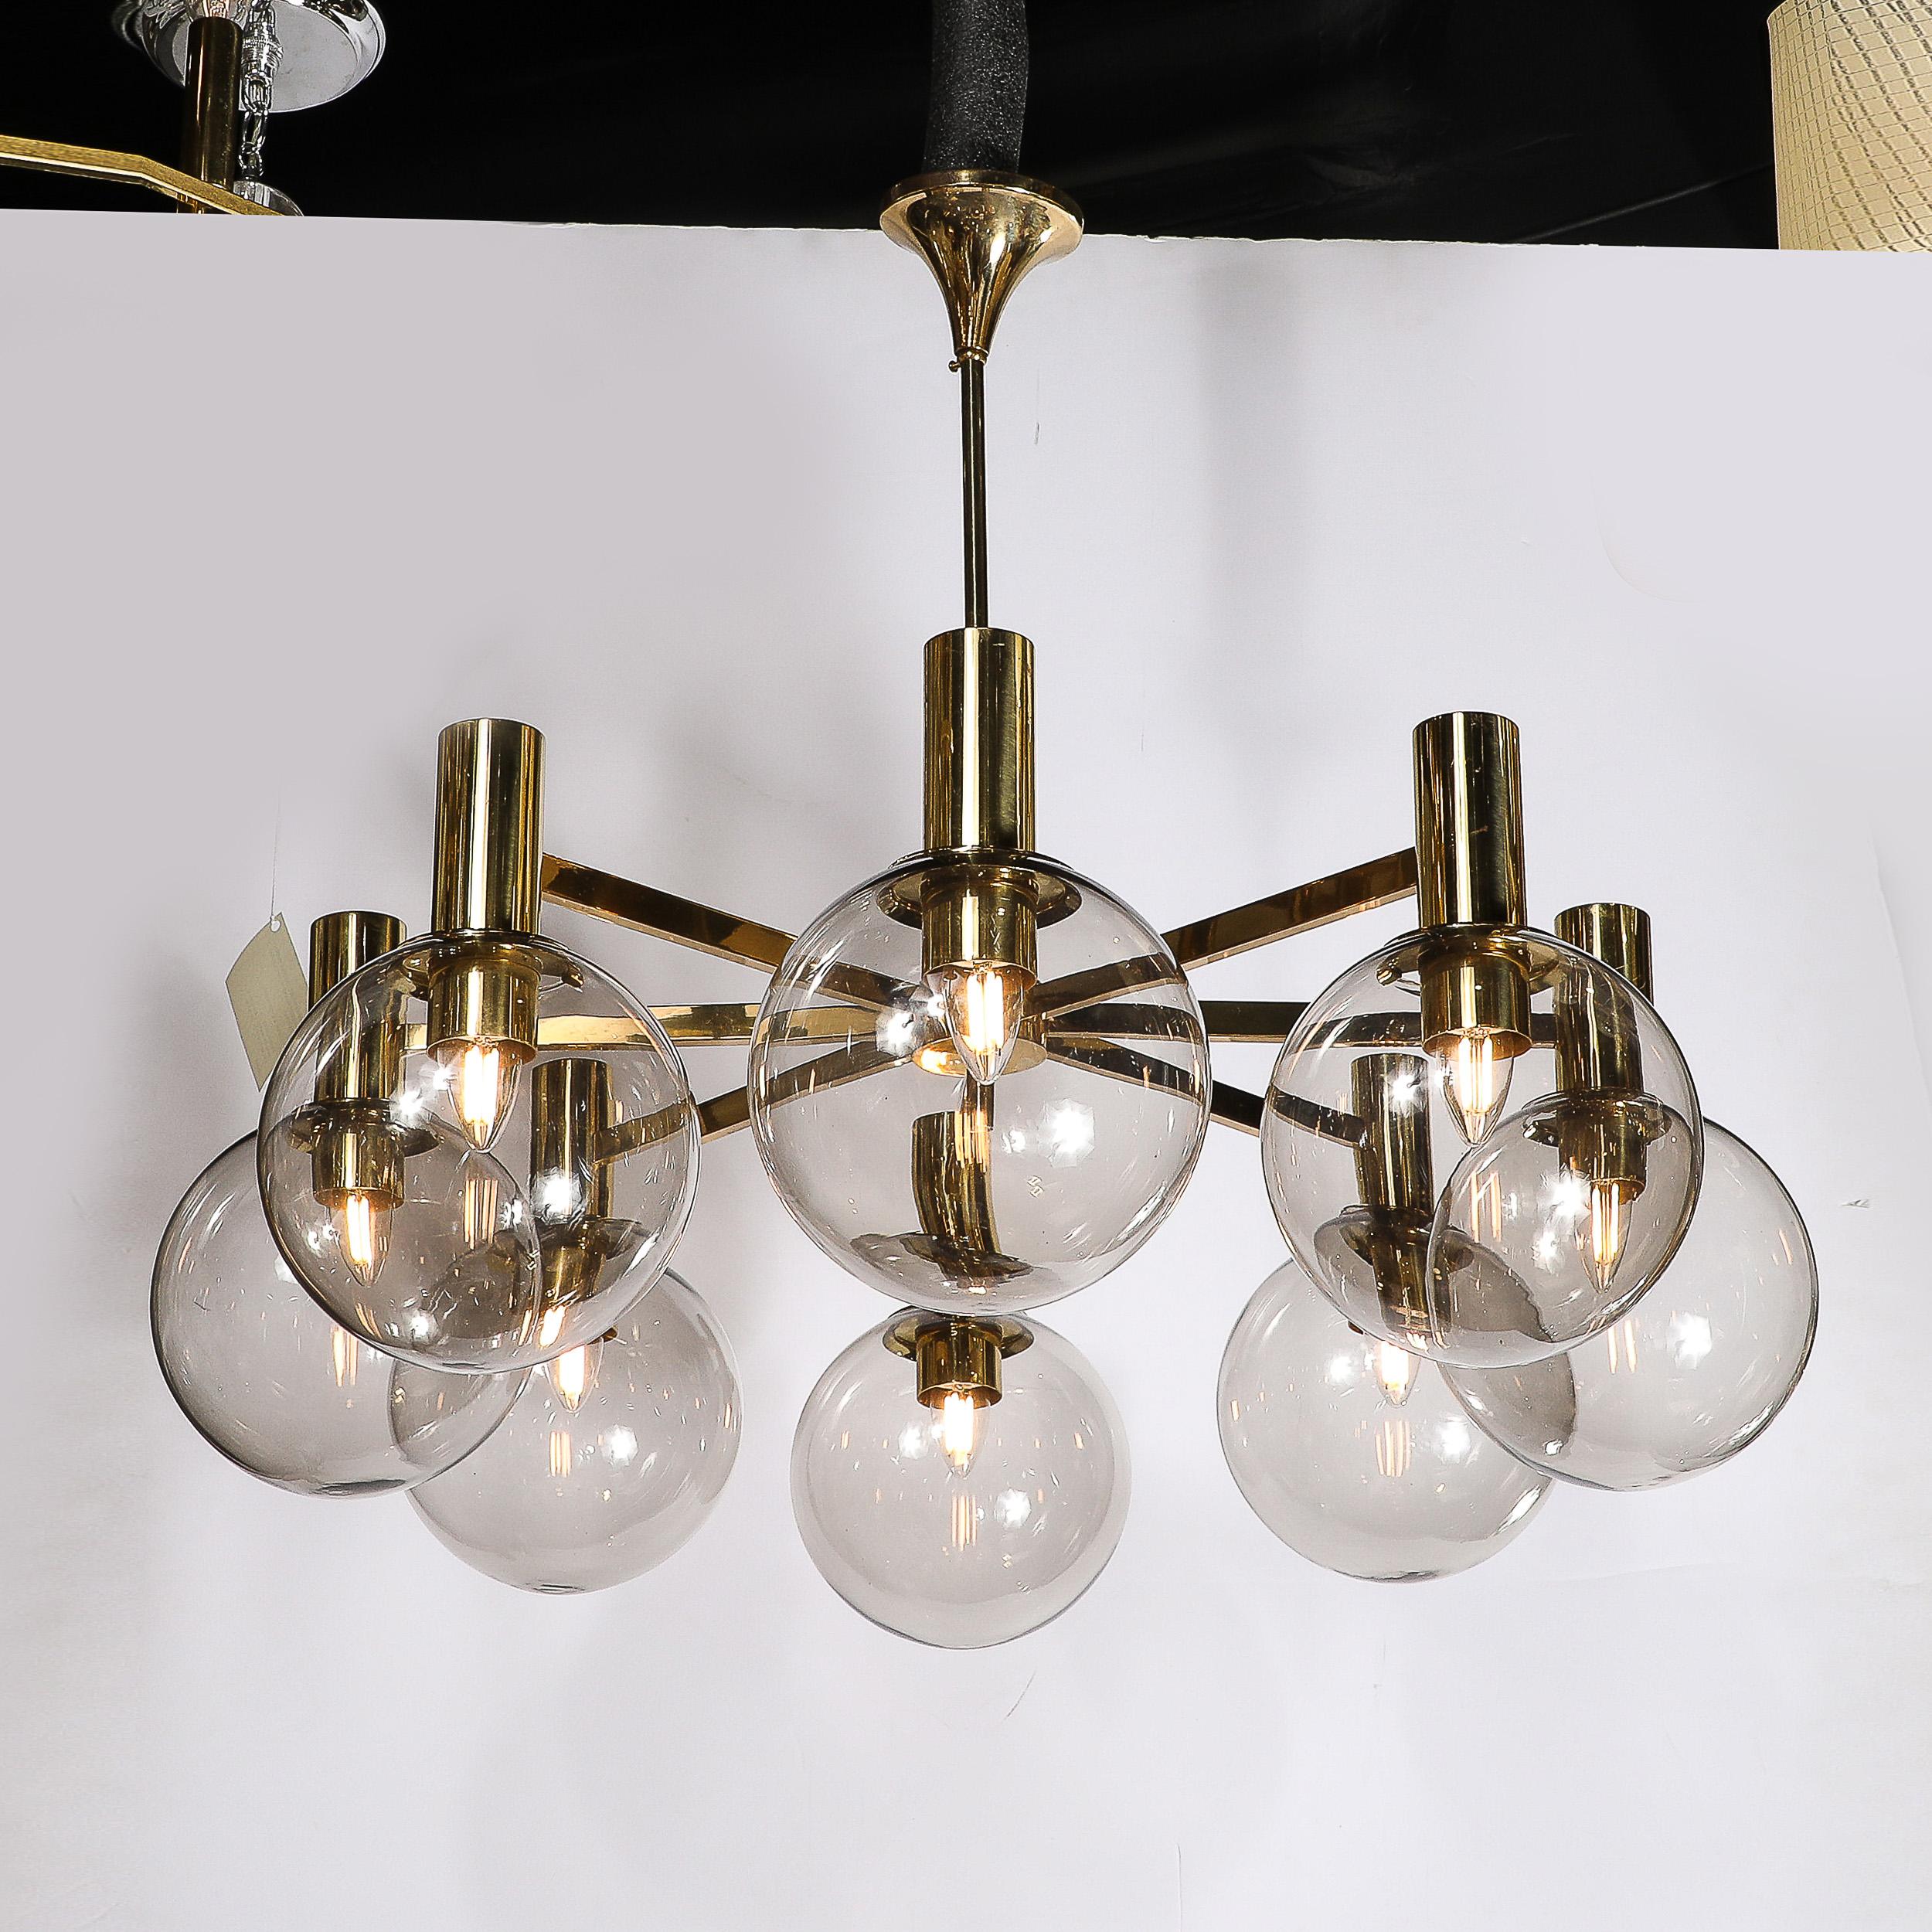 This expansive and beautifully proportioned Mid-Century Modernist Eight Globe Chandelier in Polished Brass is by the esteemed designer Hans Agne Jakobsson originates from Sweden, Circa 1960. Features a sleek geometric frame in gleaming polished